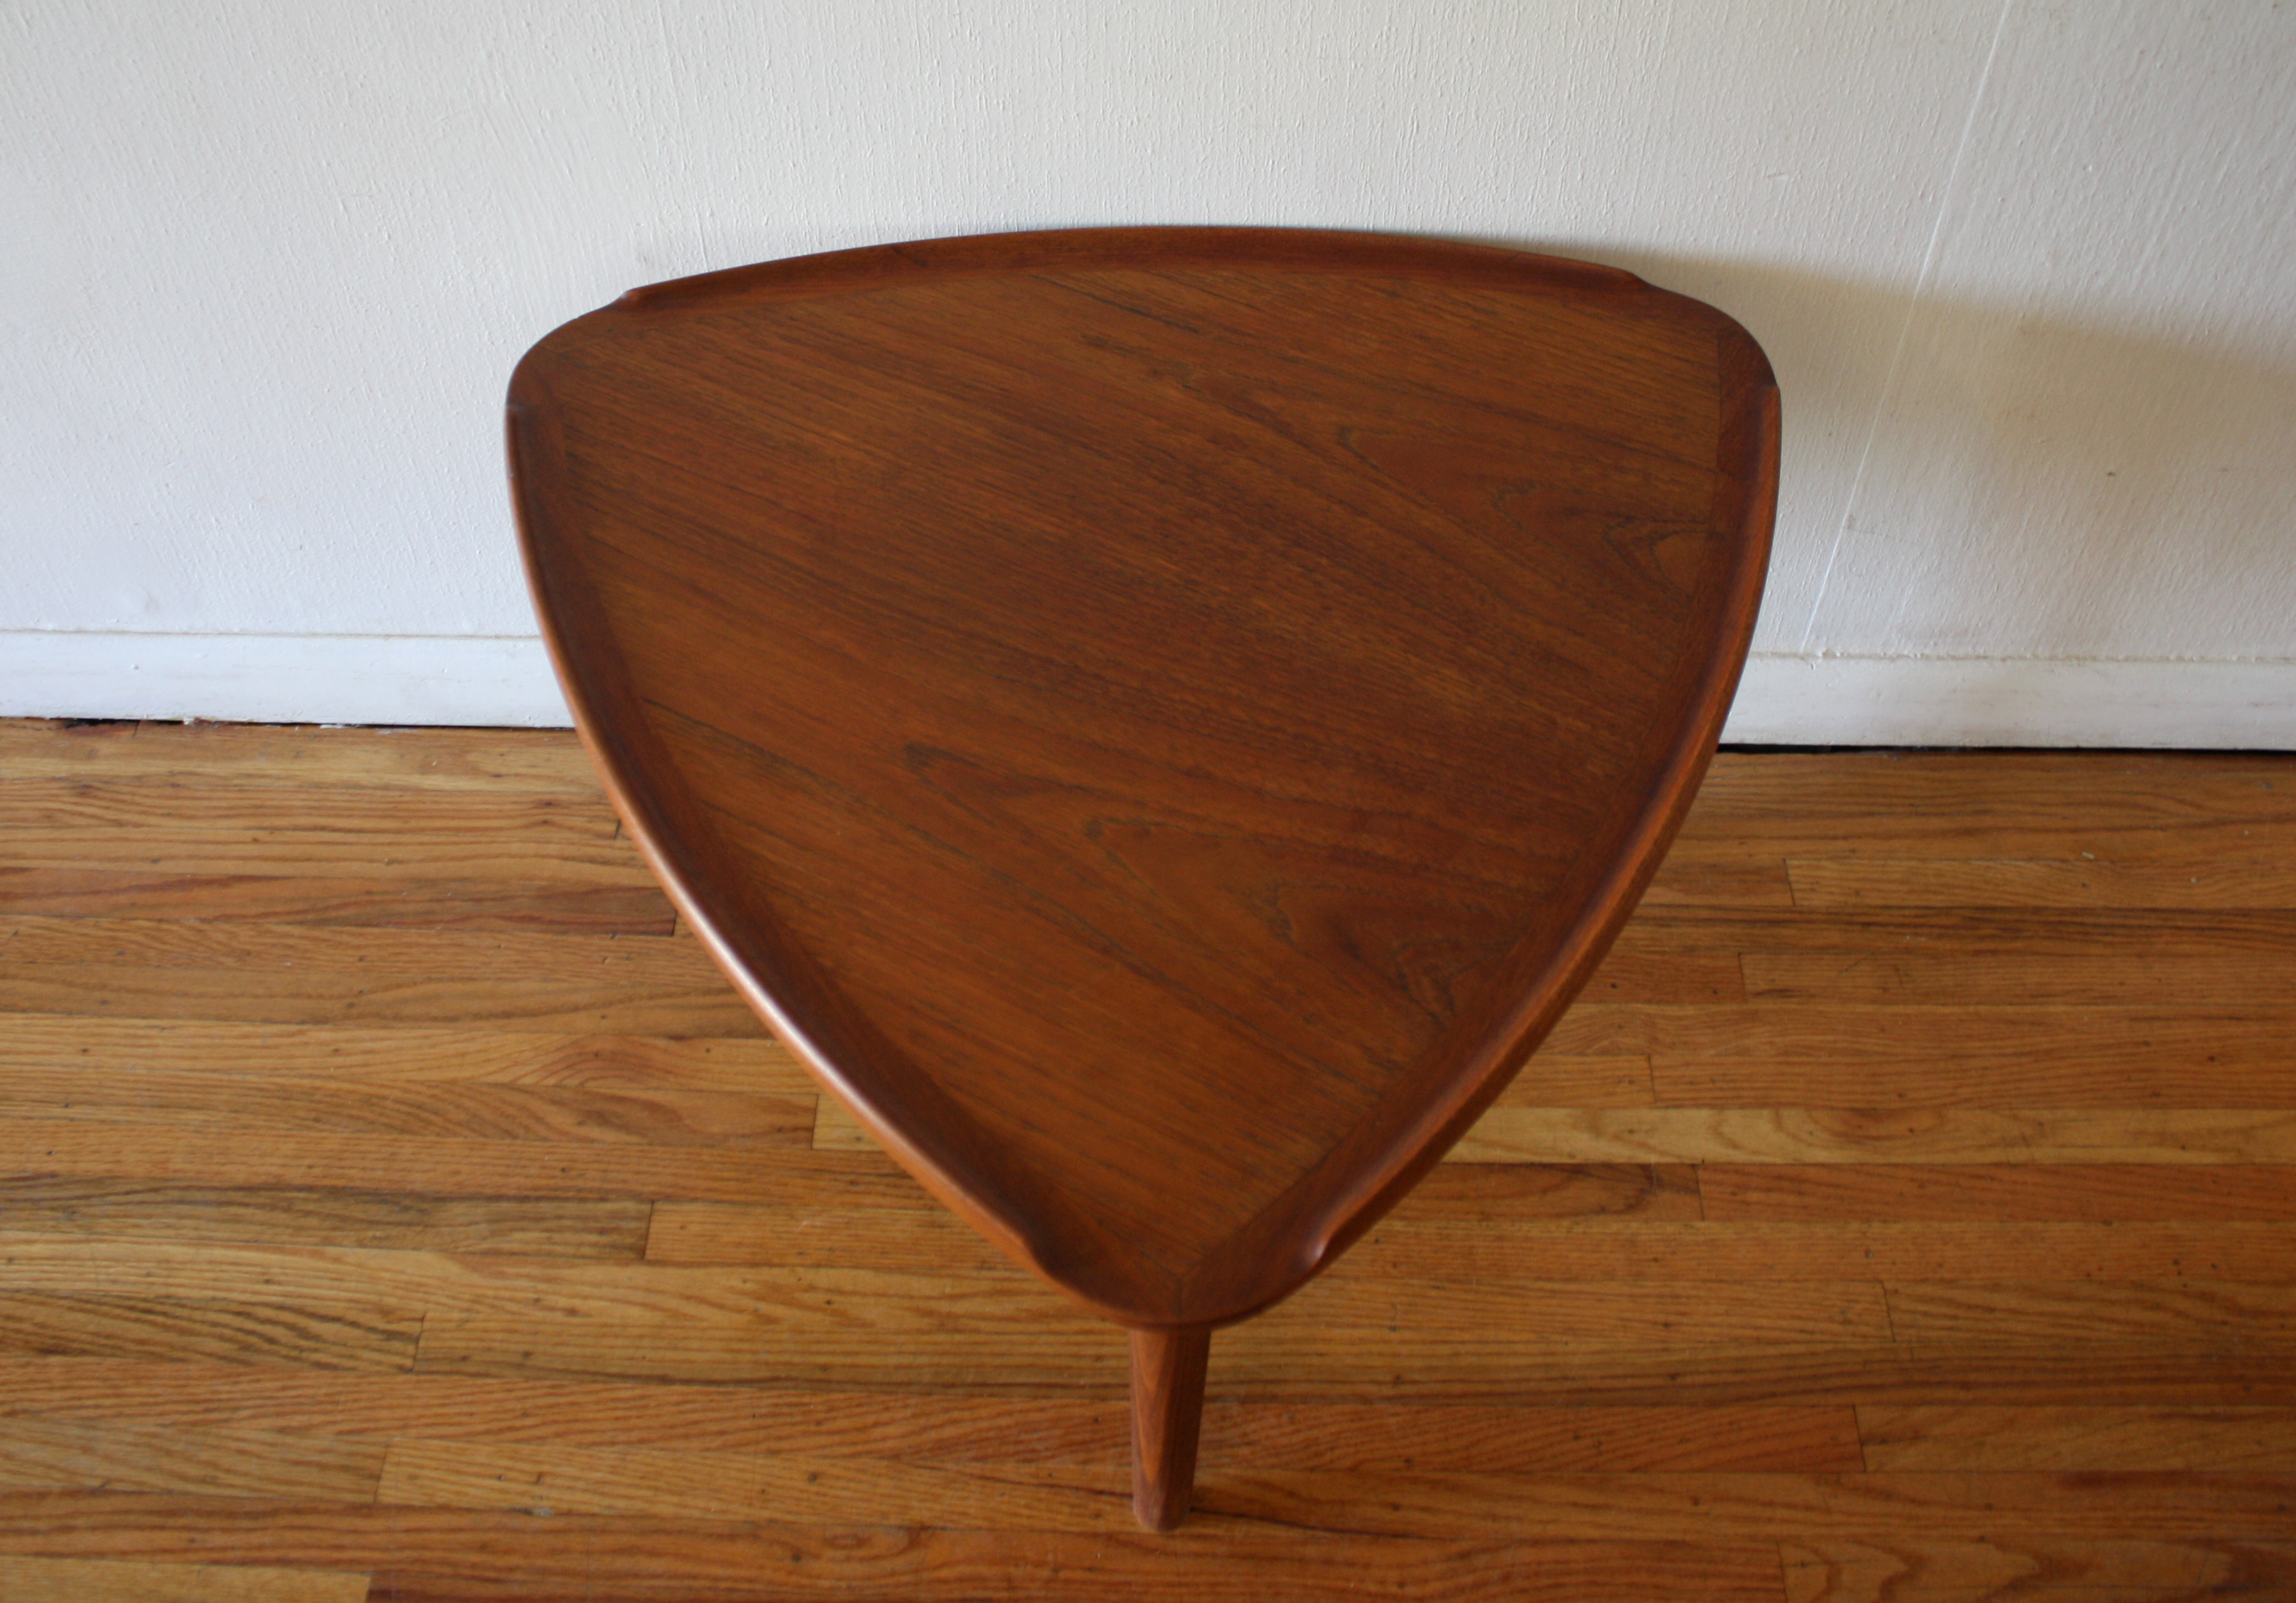 mid century modern danish teak guitar side table ked vintage triangular end wood light lazy boy furniture reviews small round with chairs dining top protector pine drawer cool